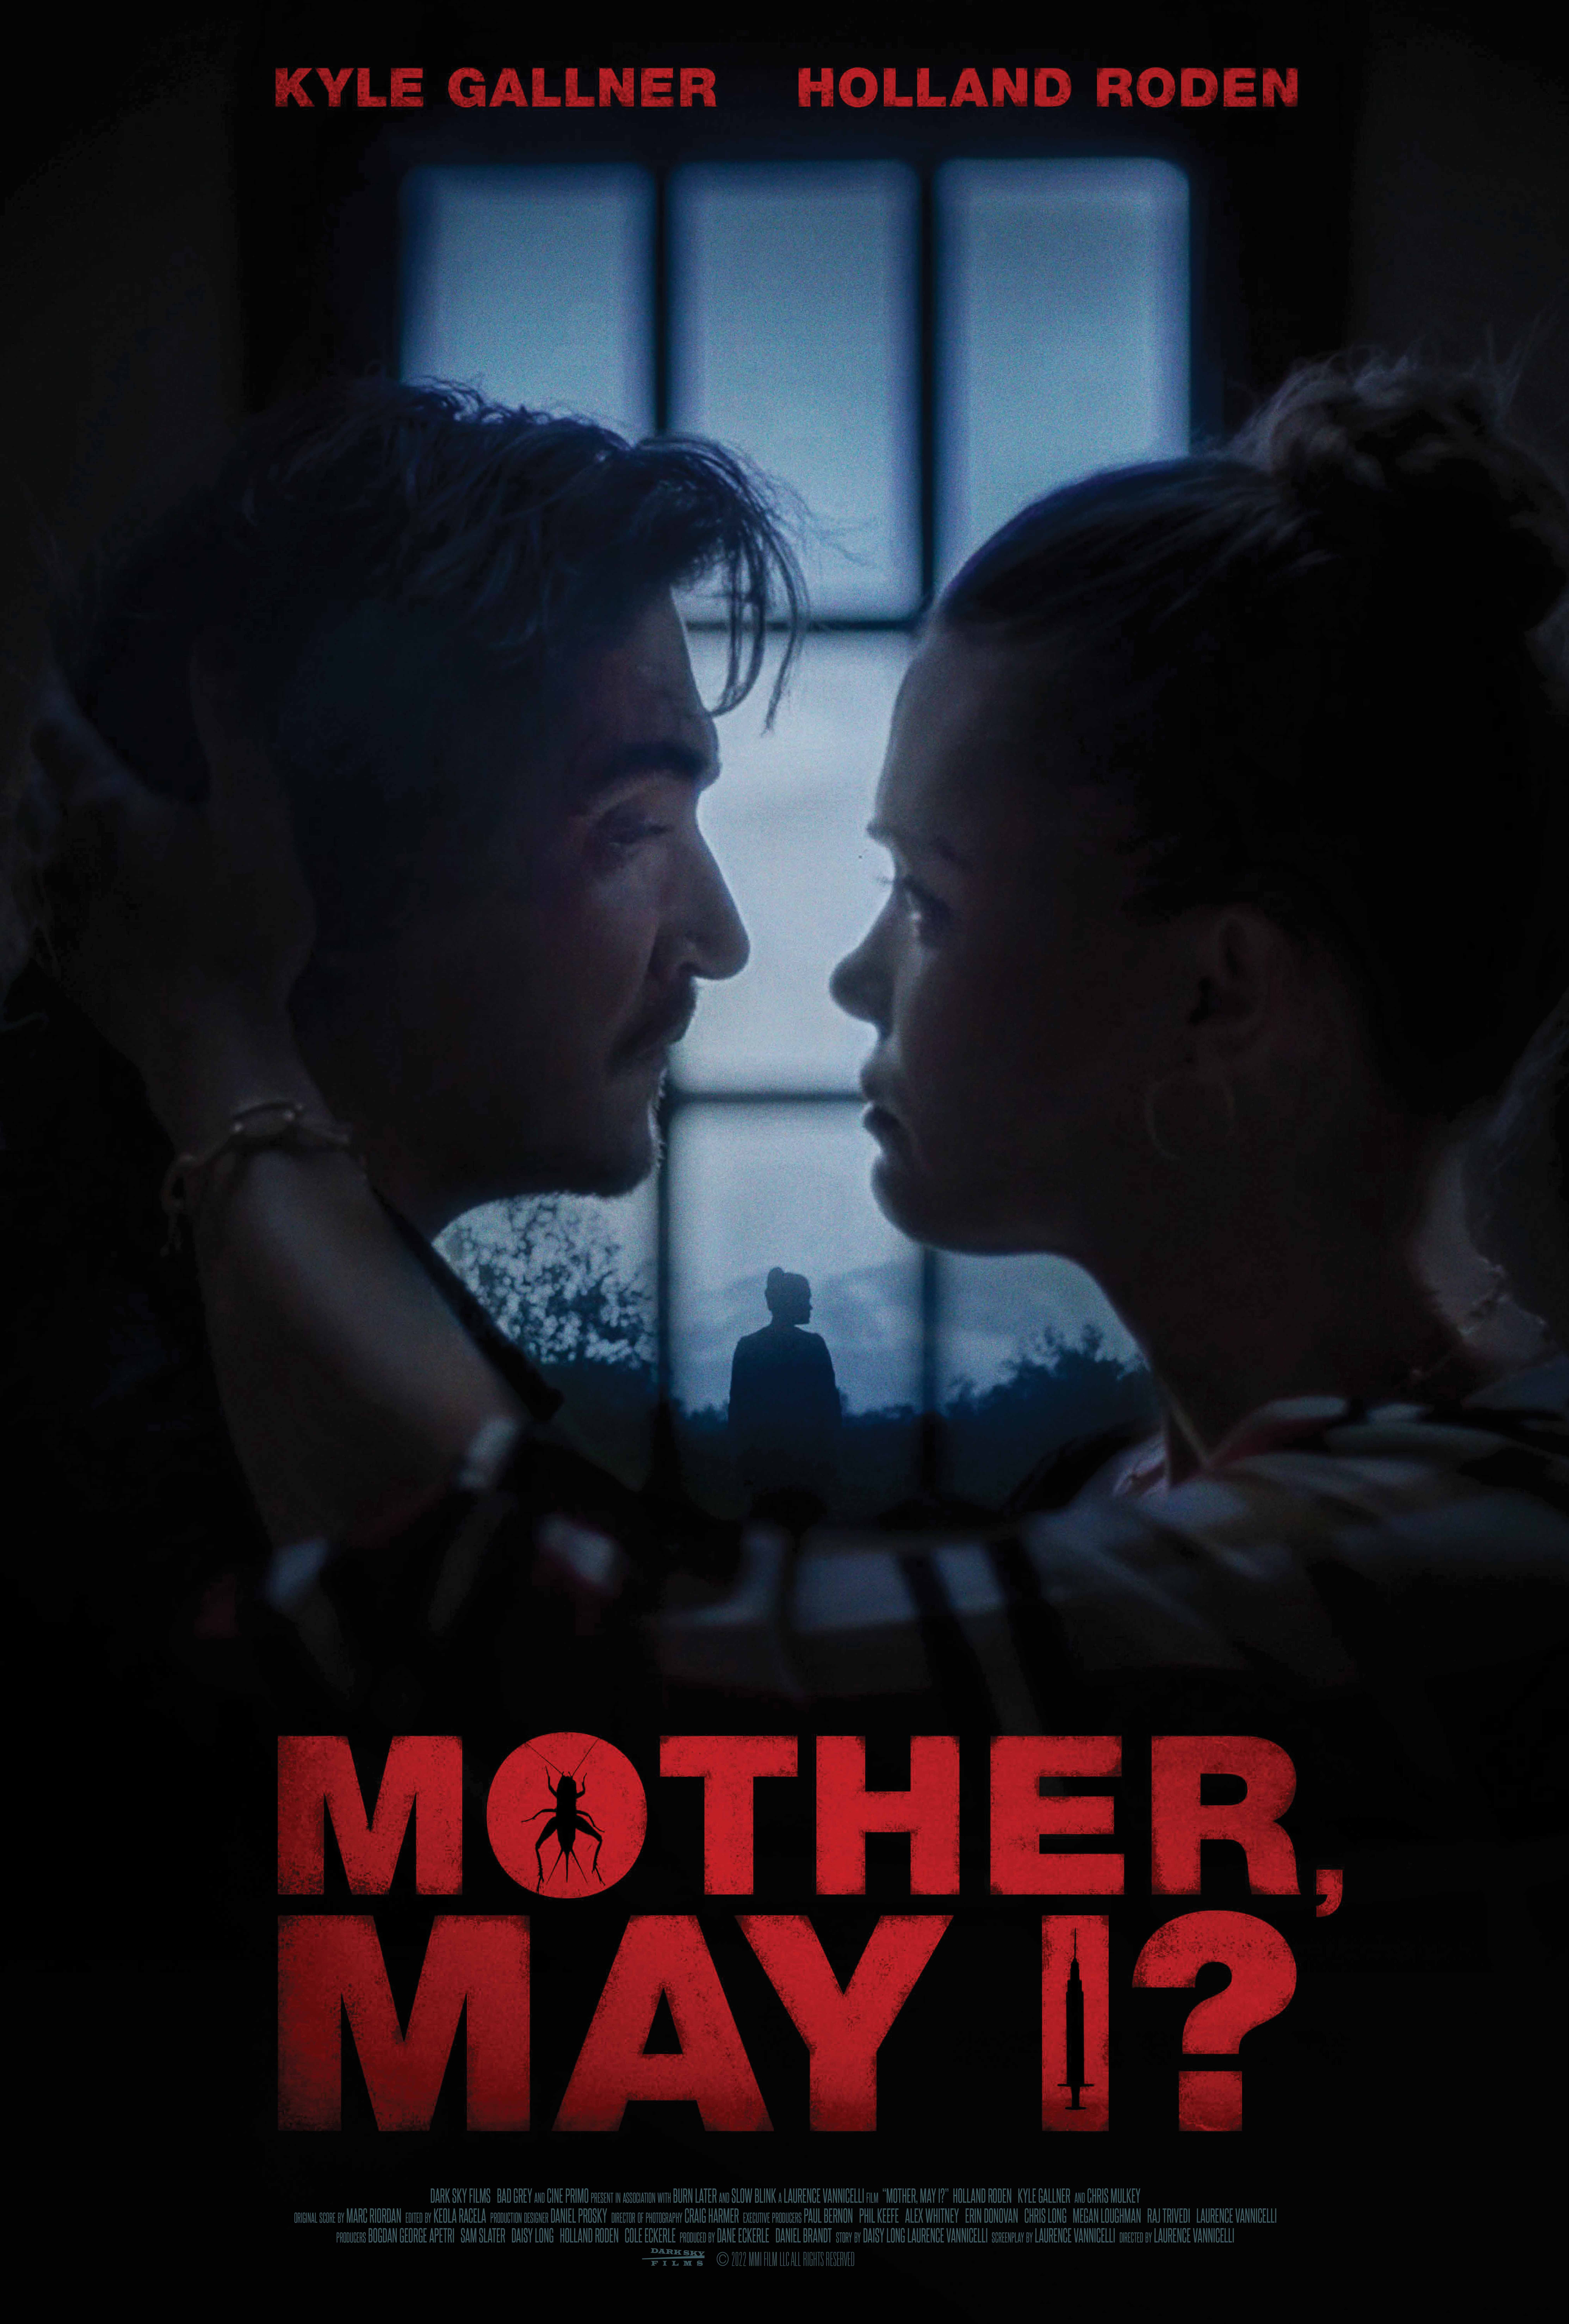 "Mother, May I?" - A Riveting Psychological Thriller Featuring Kyle Gallner and Holland Roden Set to Hit Theaters and VOD on July 21st 19